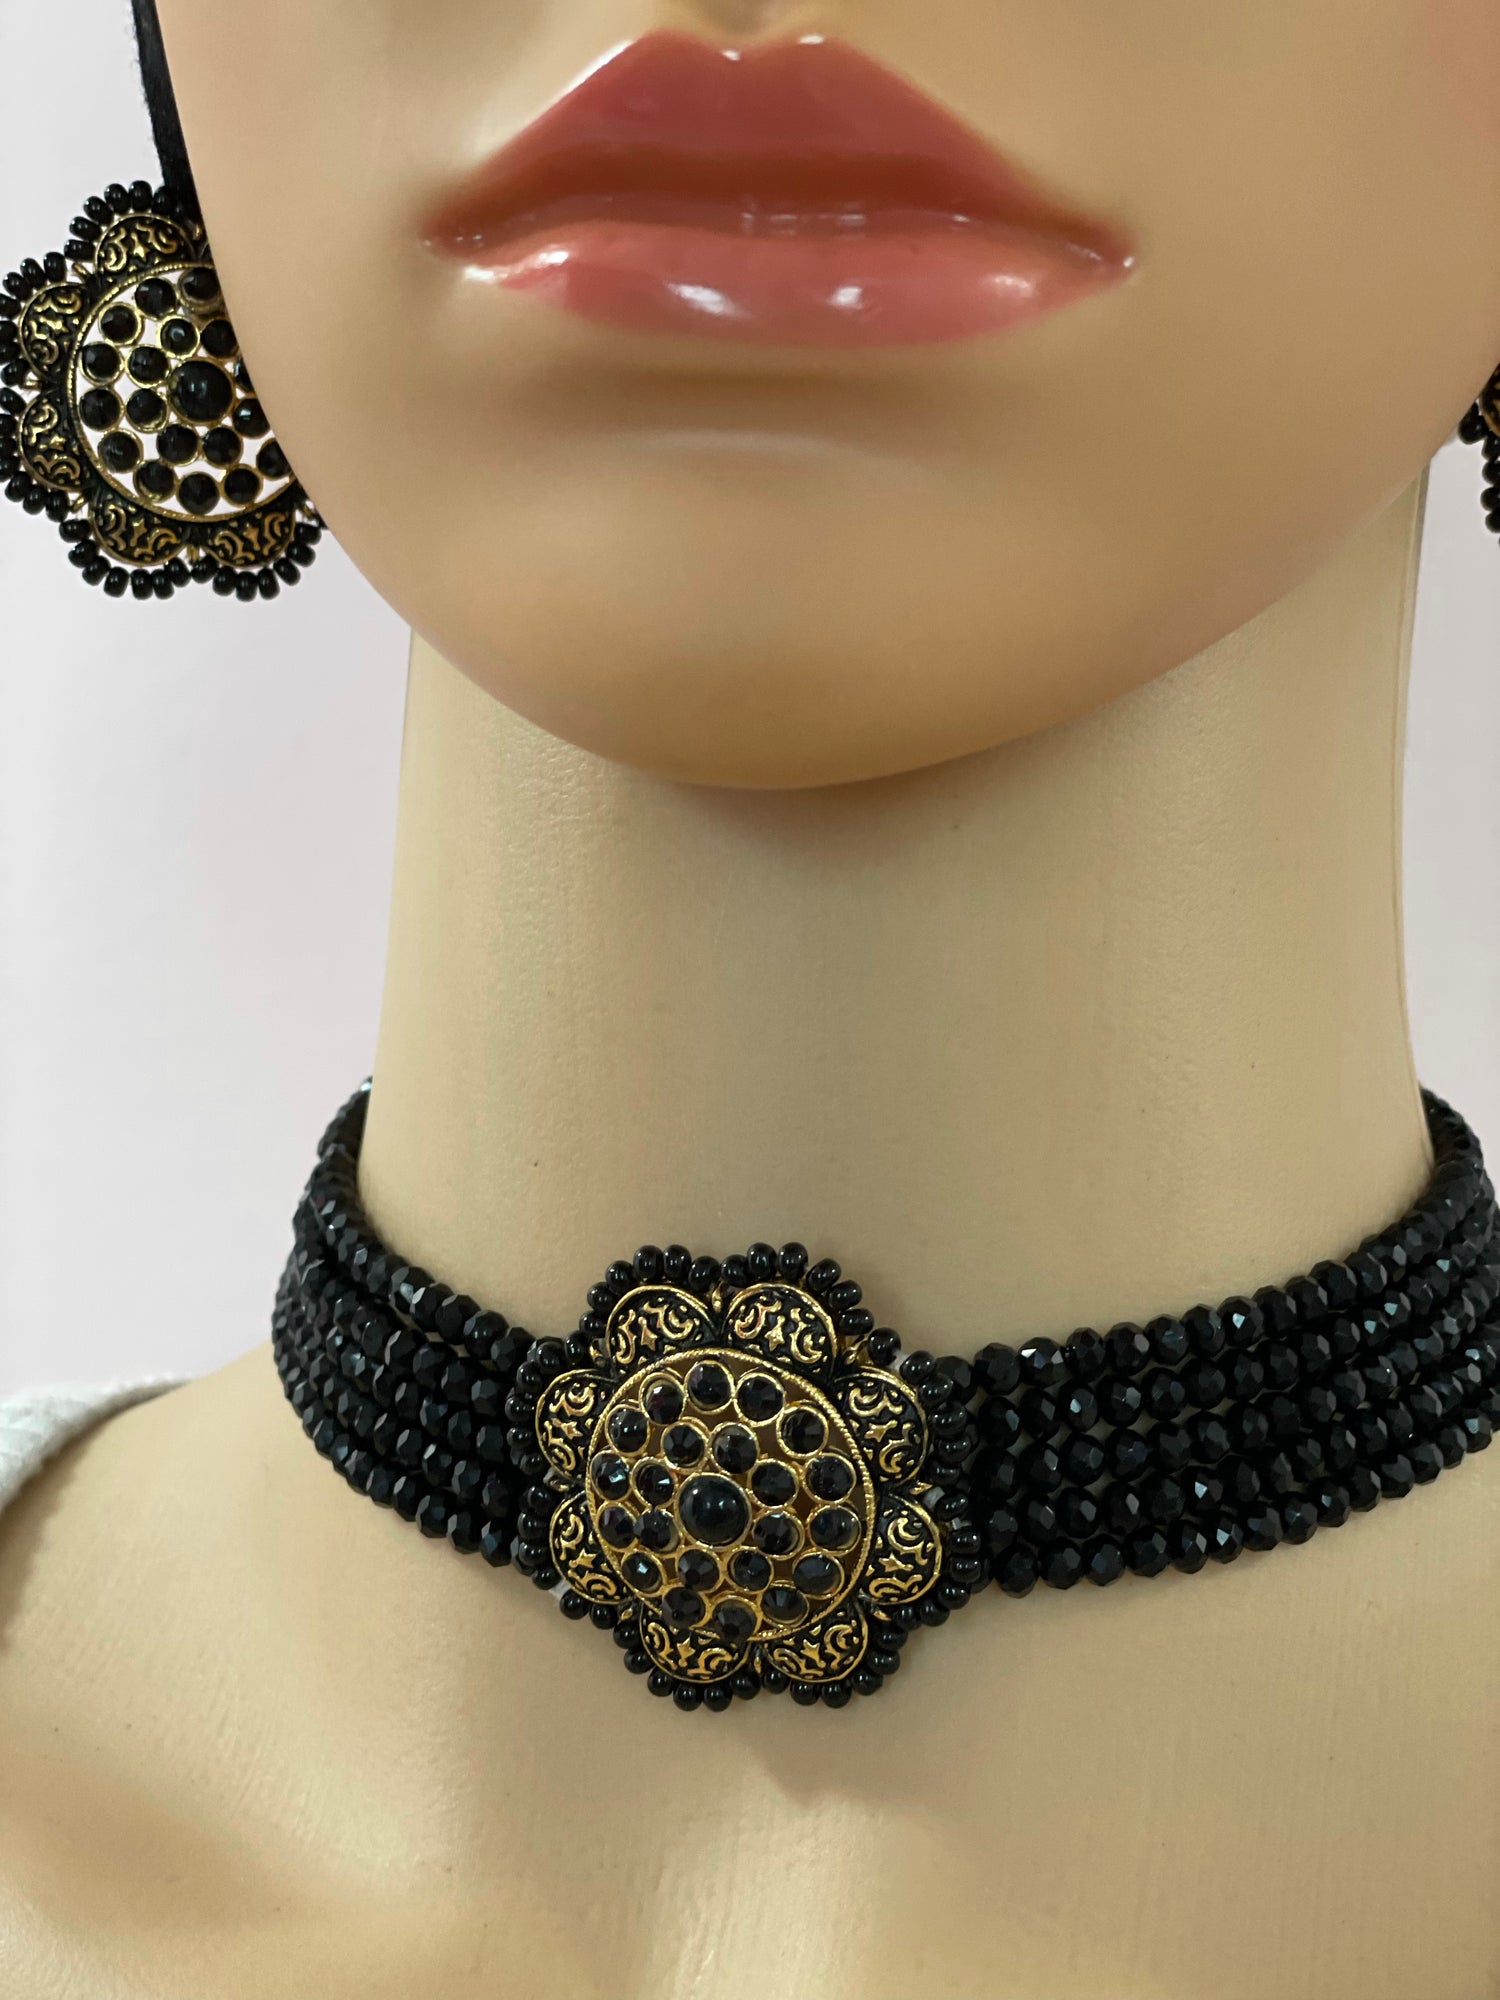 Necklace earrings set black choker handcrafted with adjustable back